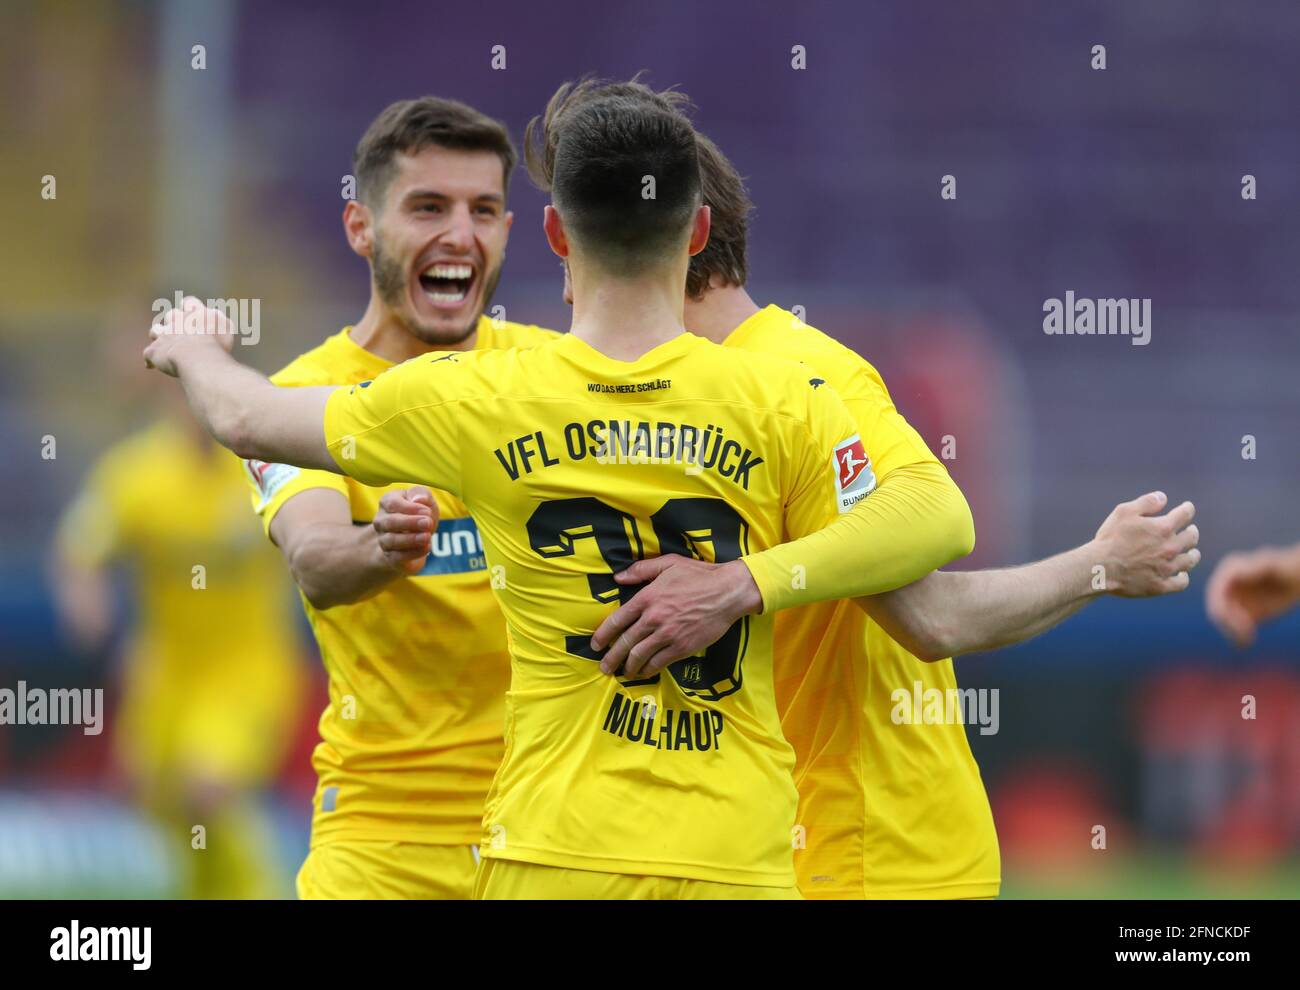 16 May 2021, Lower Saxony, Osnabrück: Football: 2nd Bundesliga, VfL Osnabrück - Hamburger SV, 33rd matchday at Stadion an der Bremer Brücke. Osnabrück's goal scorer Maurice Multhaup (centre) celebrates his goal to make it 2:1 with Bashkim Ajdini (l). Photo: Friso Gentsch/dpa - IMPORTANT NOTE: In accordance with the regulations of the DFL Deutsche Fußball Liga and/or the DFB Deutscher Fußball-Bund, it is prohibited to use or have used photographs taken in the stadium and/or of the match in the form of sequence pictures and/or video-like photo series. Stock Photo